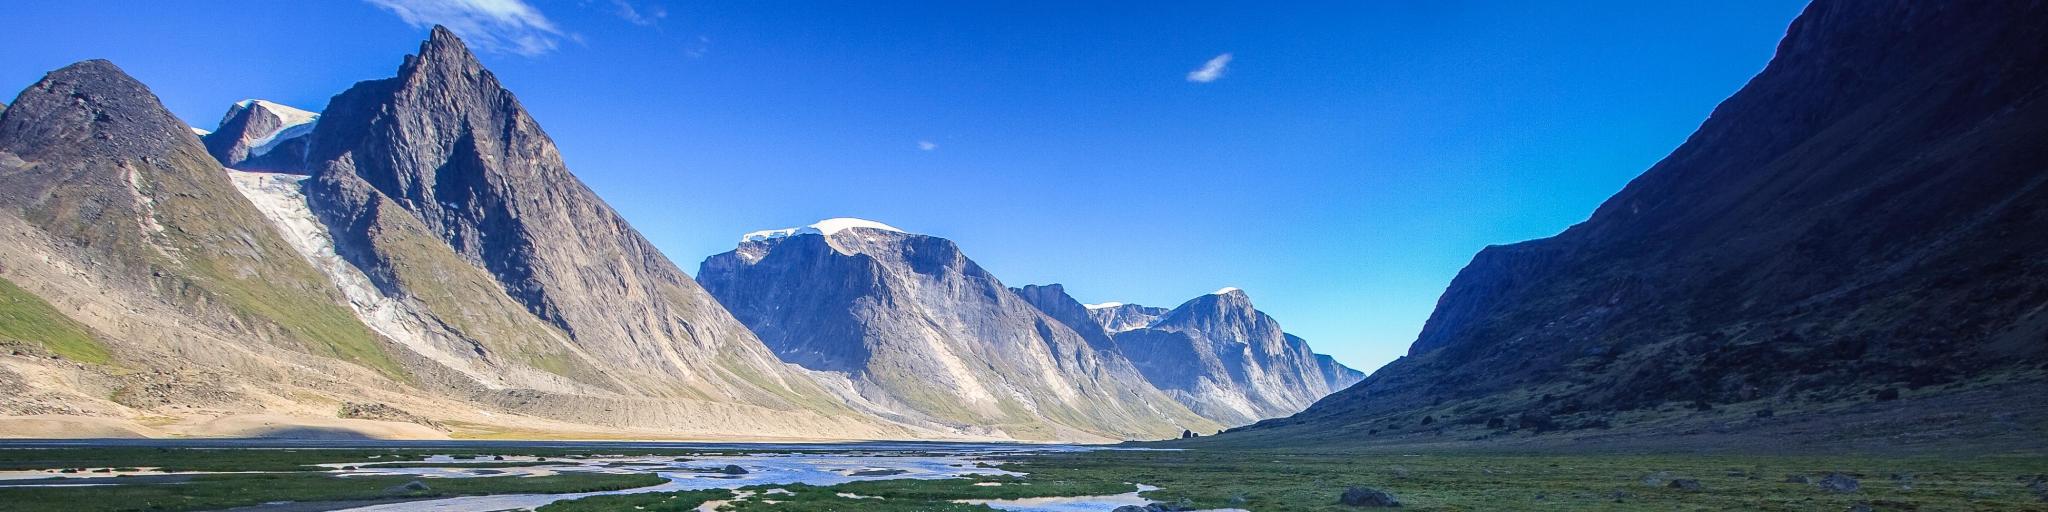 Panoramic view of the rugged Akshayuk Pass, Nunavut, Canada, with a blue sky above